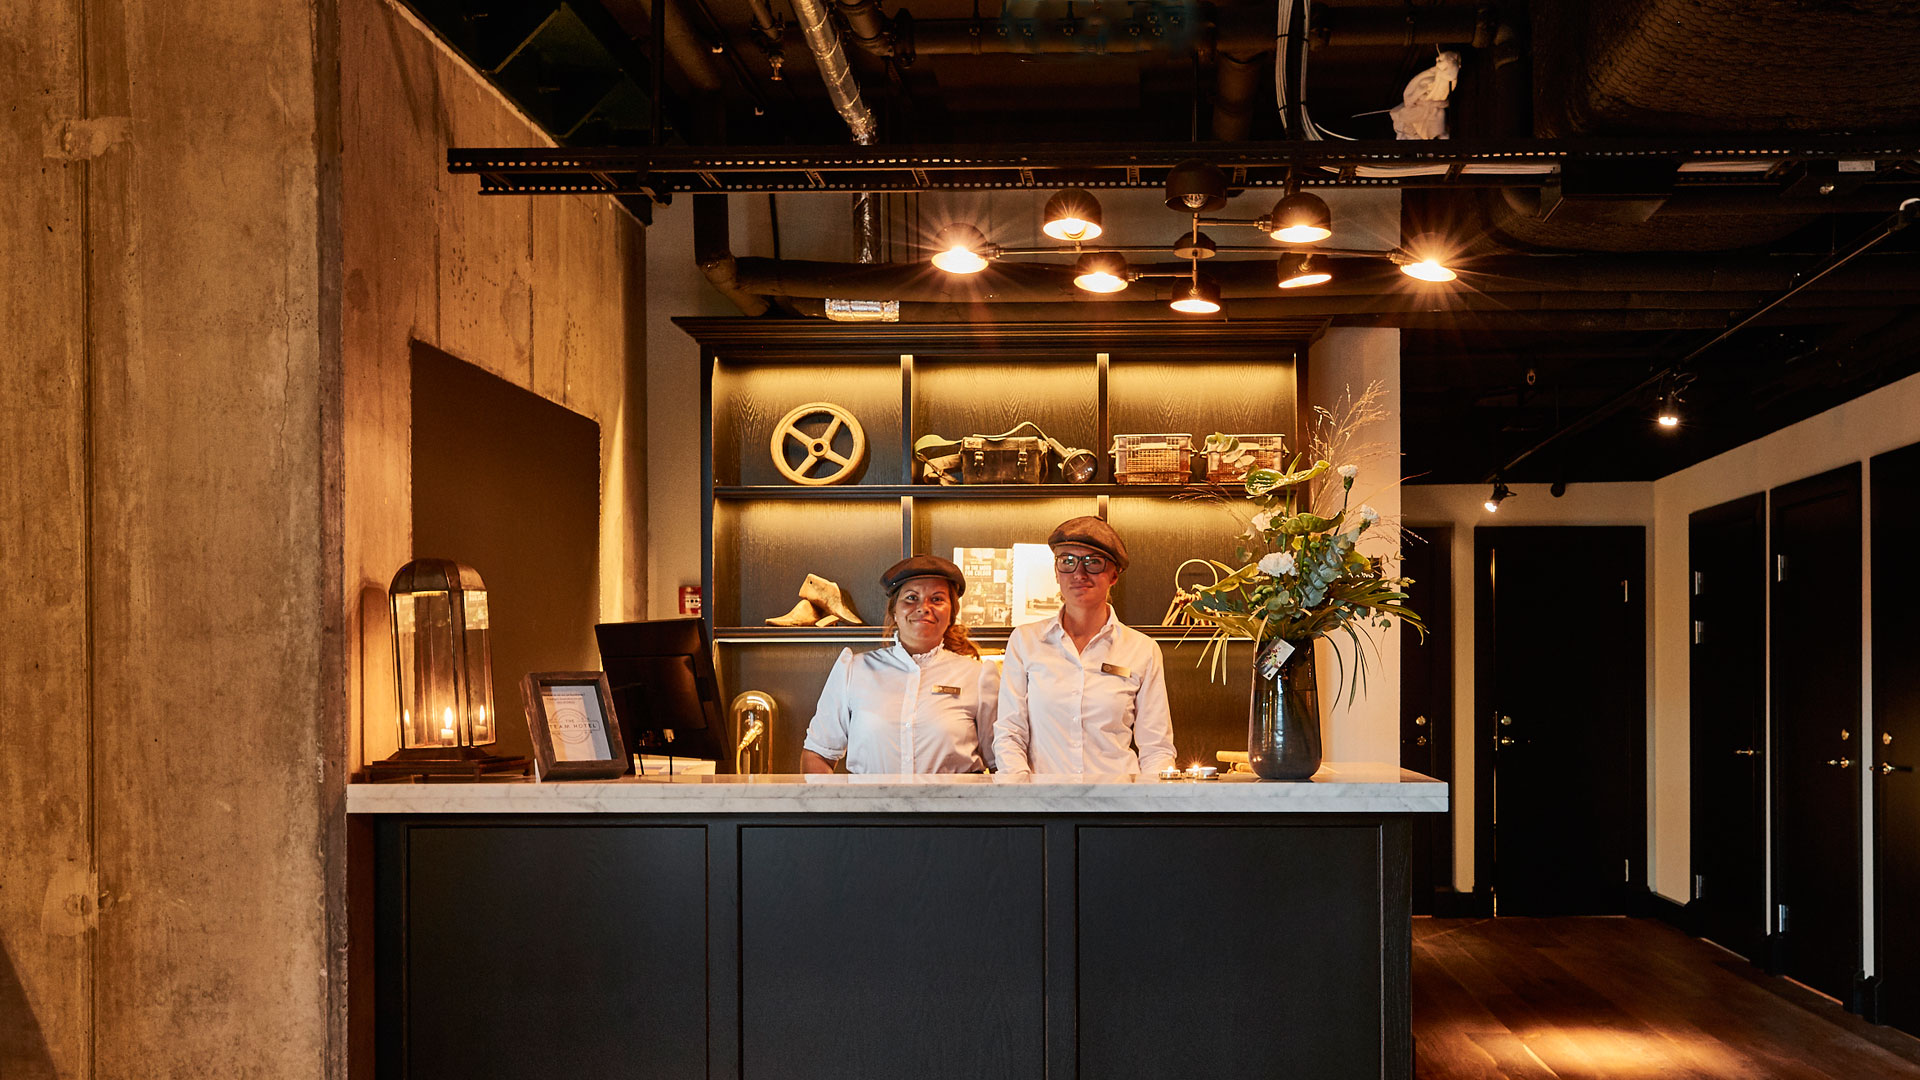 Our industrial lights enhance the industrial décor of The Steam Hotel, Sweden